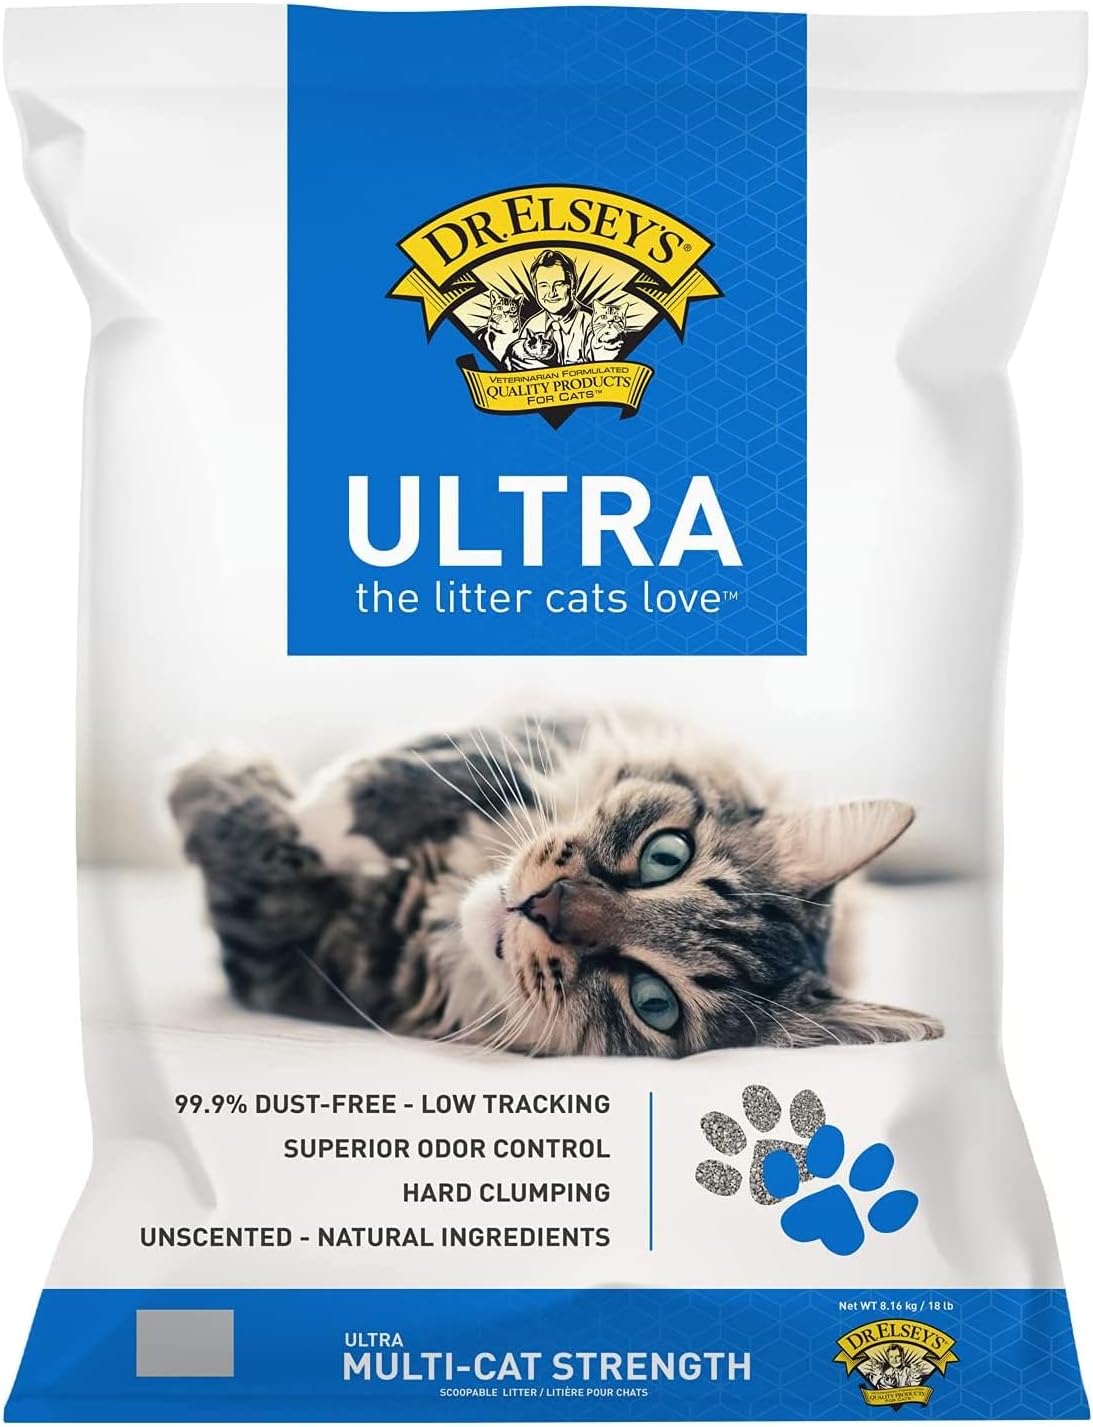 Best Litter Box: Top 5 Picks for Happy Cats